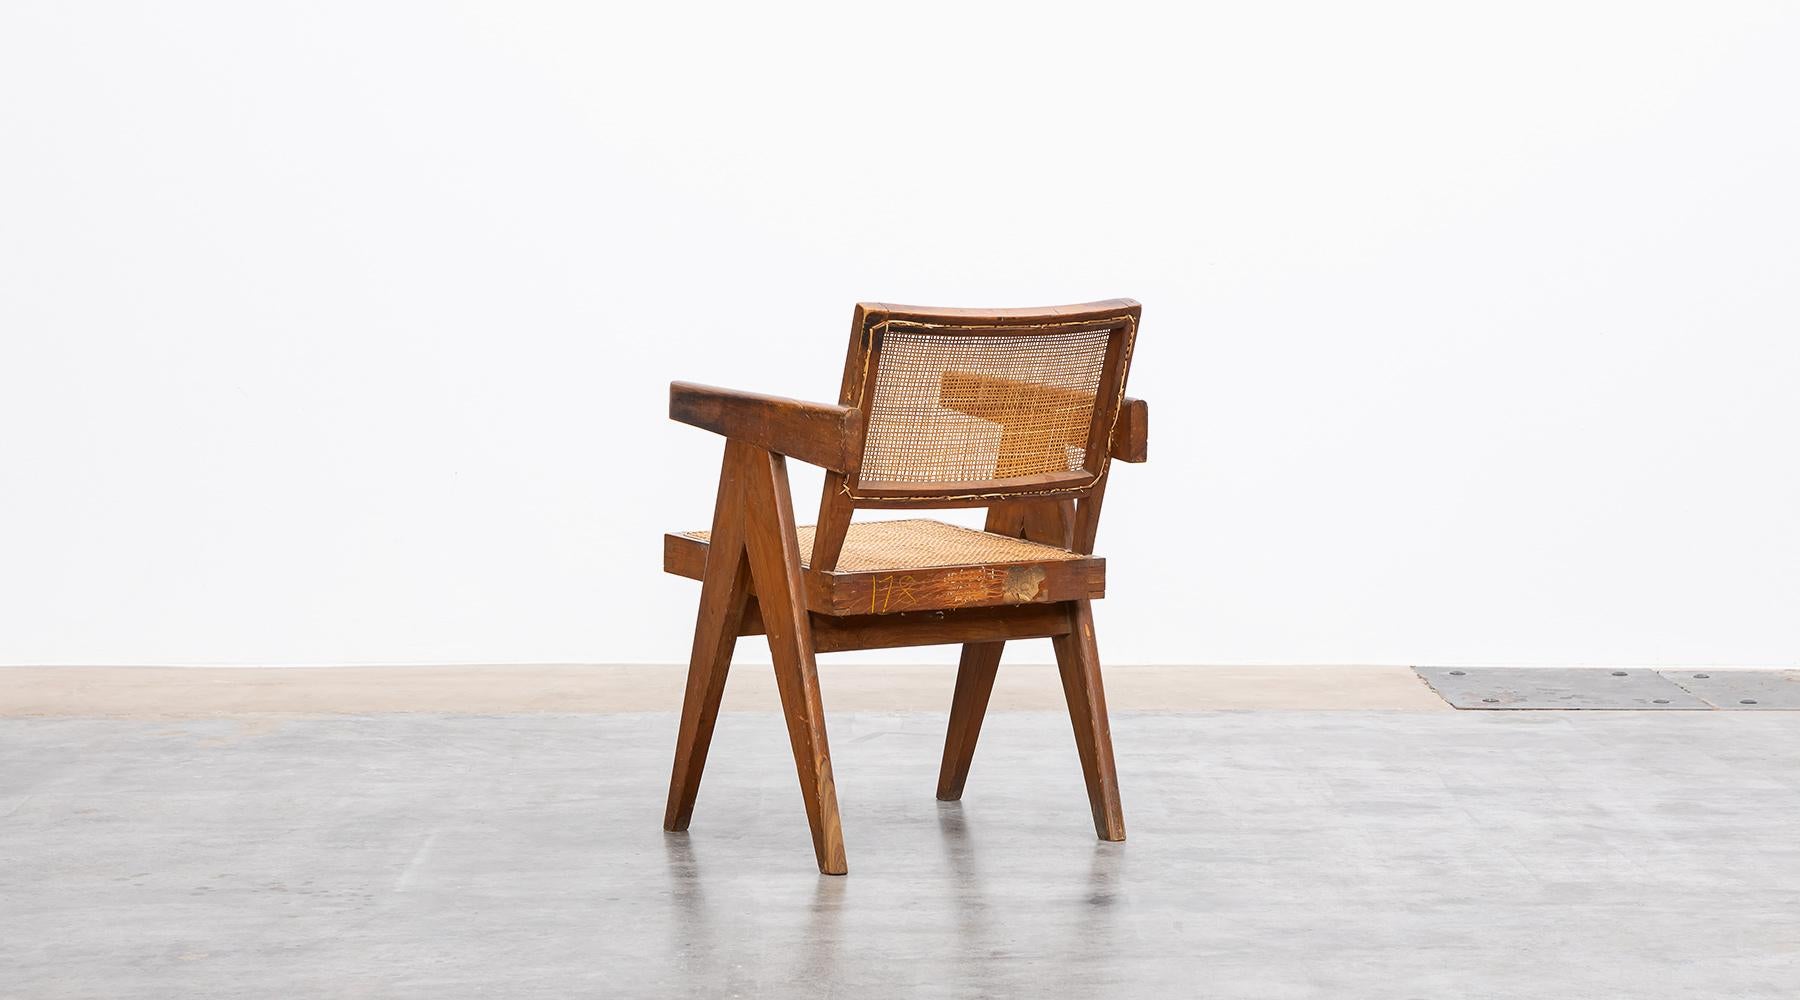 1950s Brown Wooden Teak and Cane Lounge Chair by Pierre Jeanneret 'c' For Sale 1